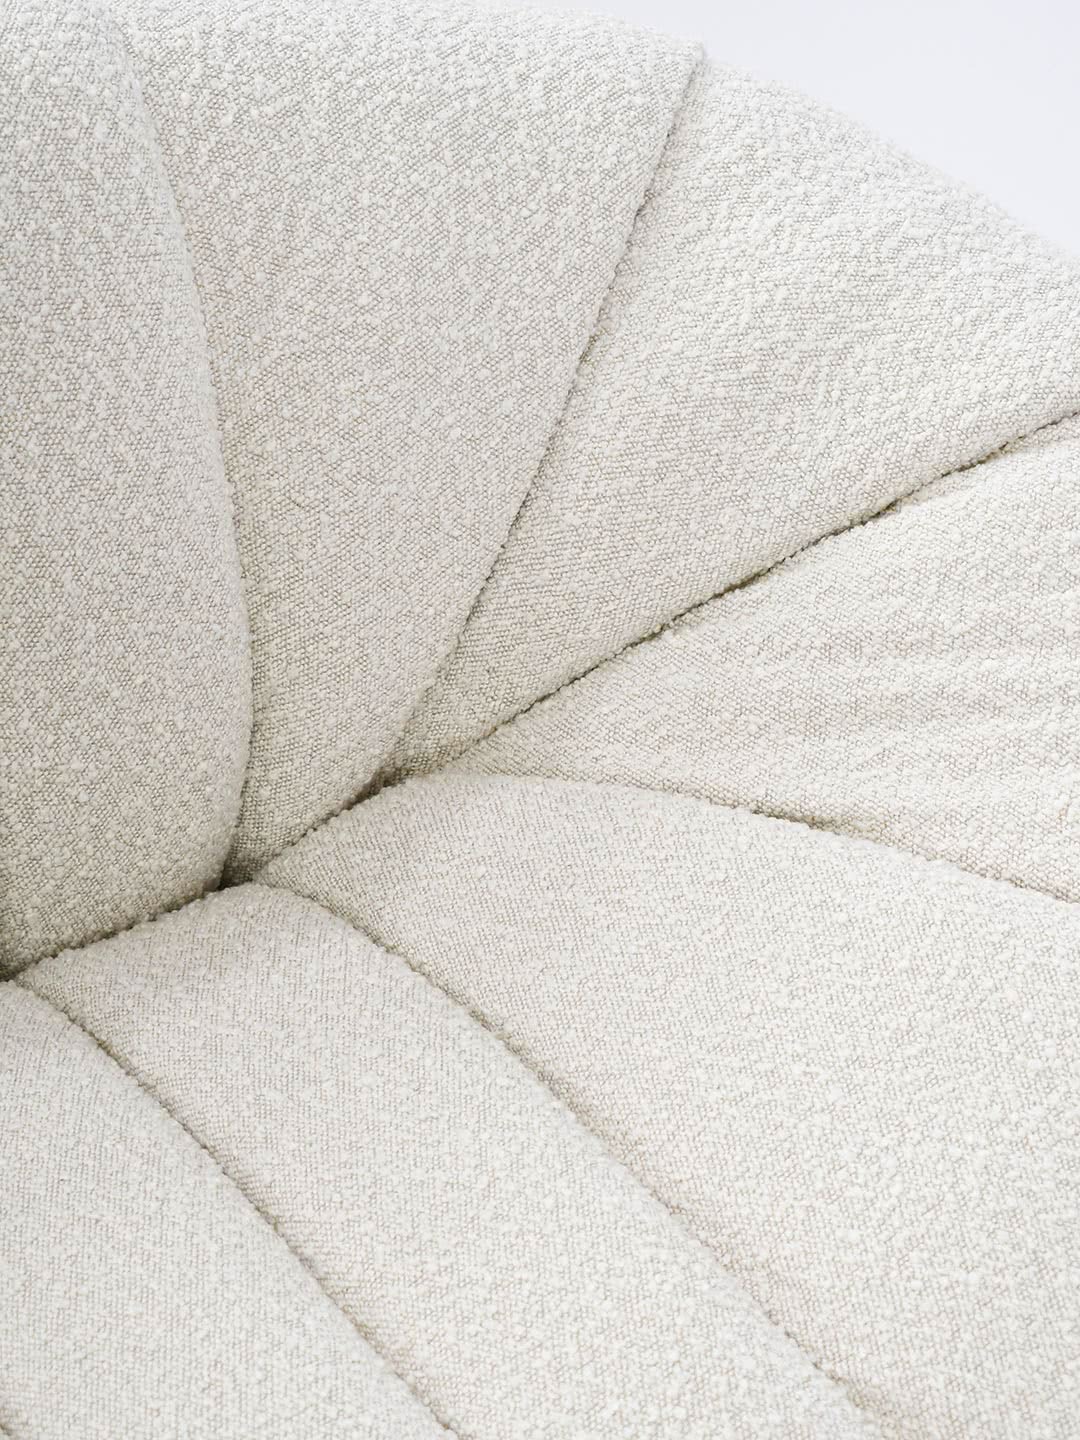 Lily Sofa in Ivory - boucle fabric detail image